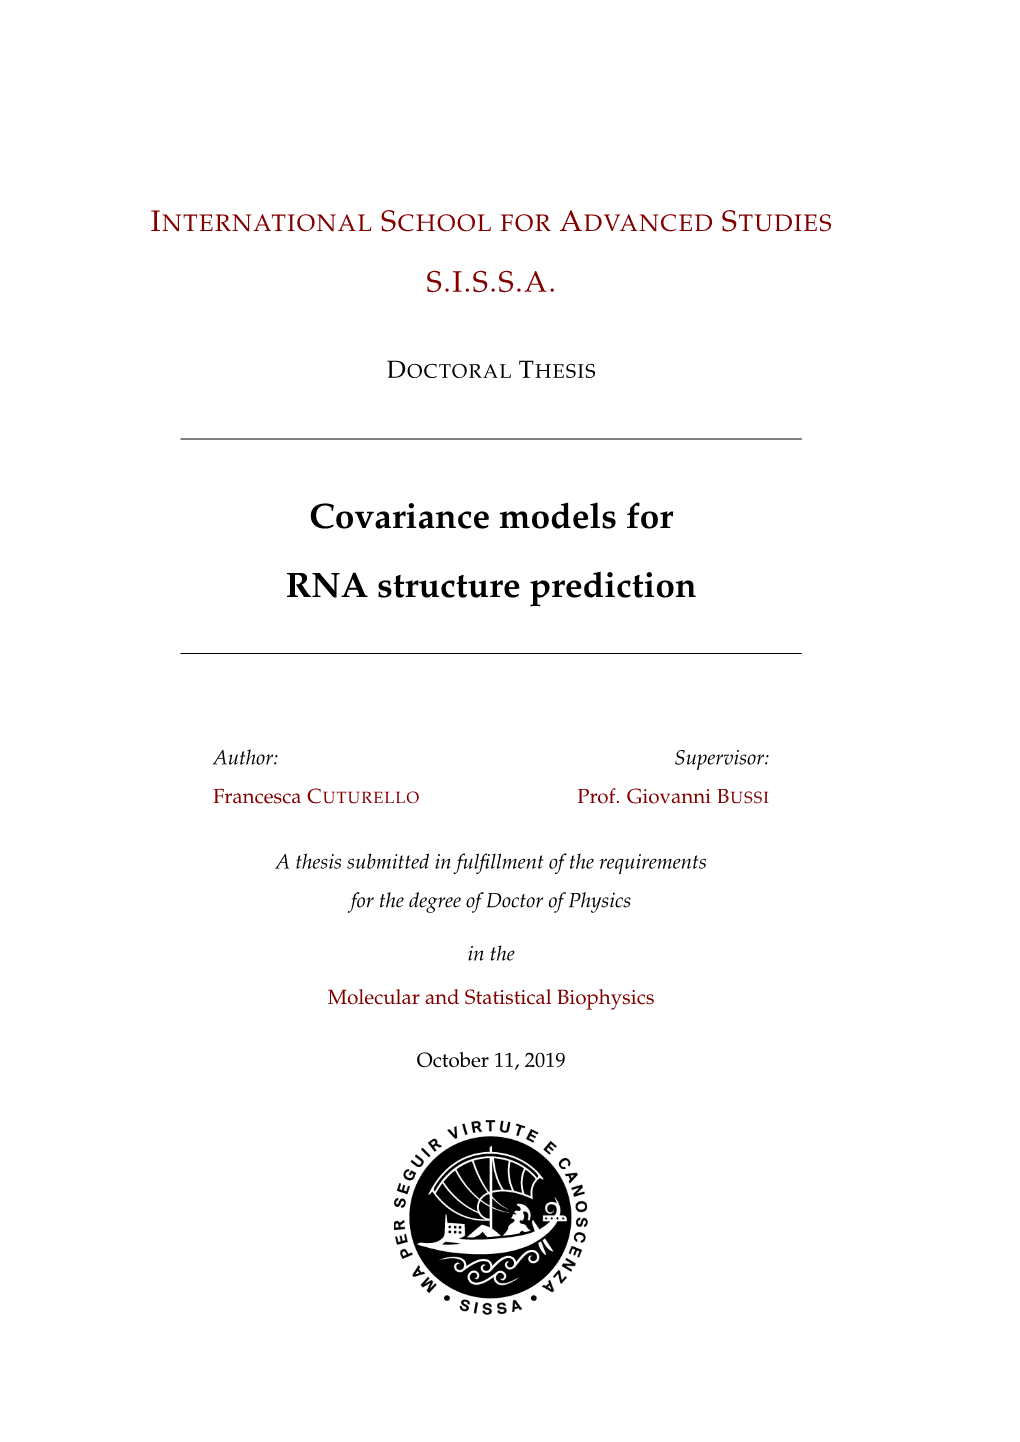 Covariance Models for RNA Structure Prediction